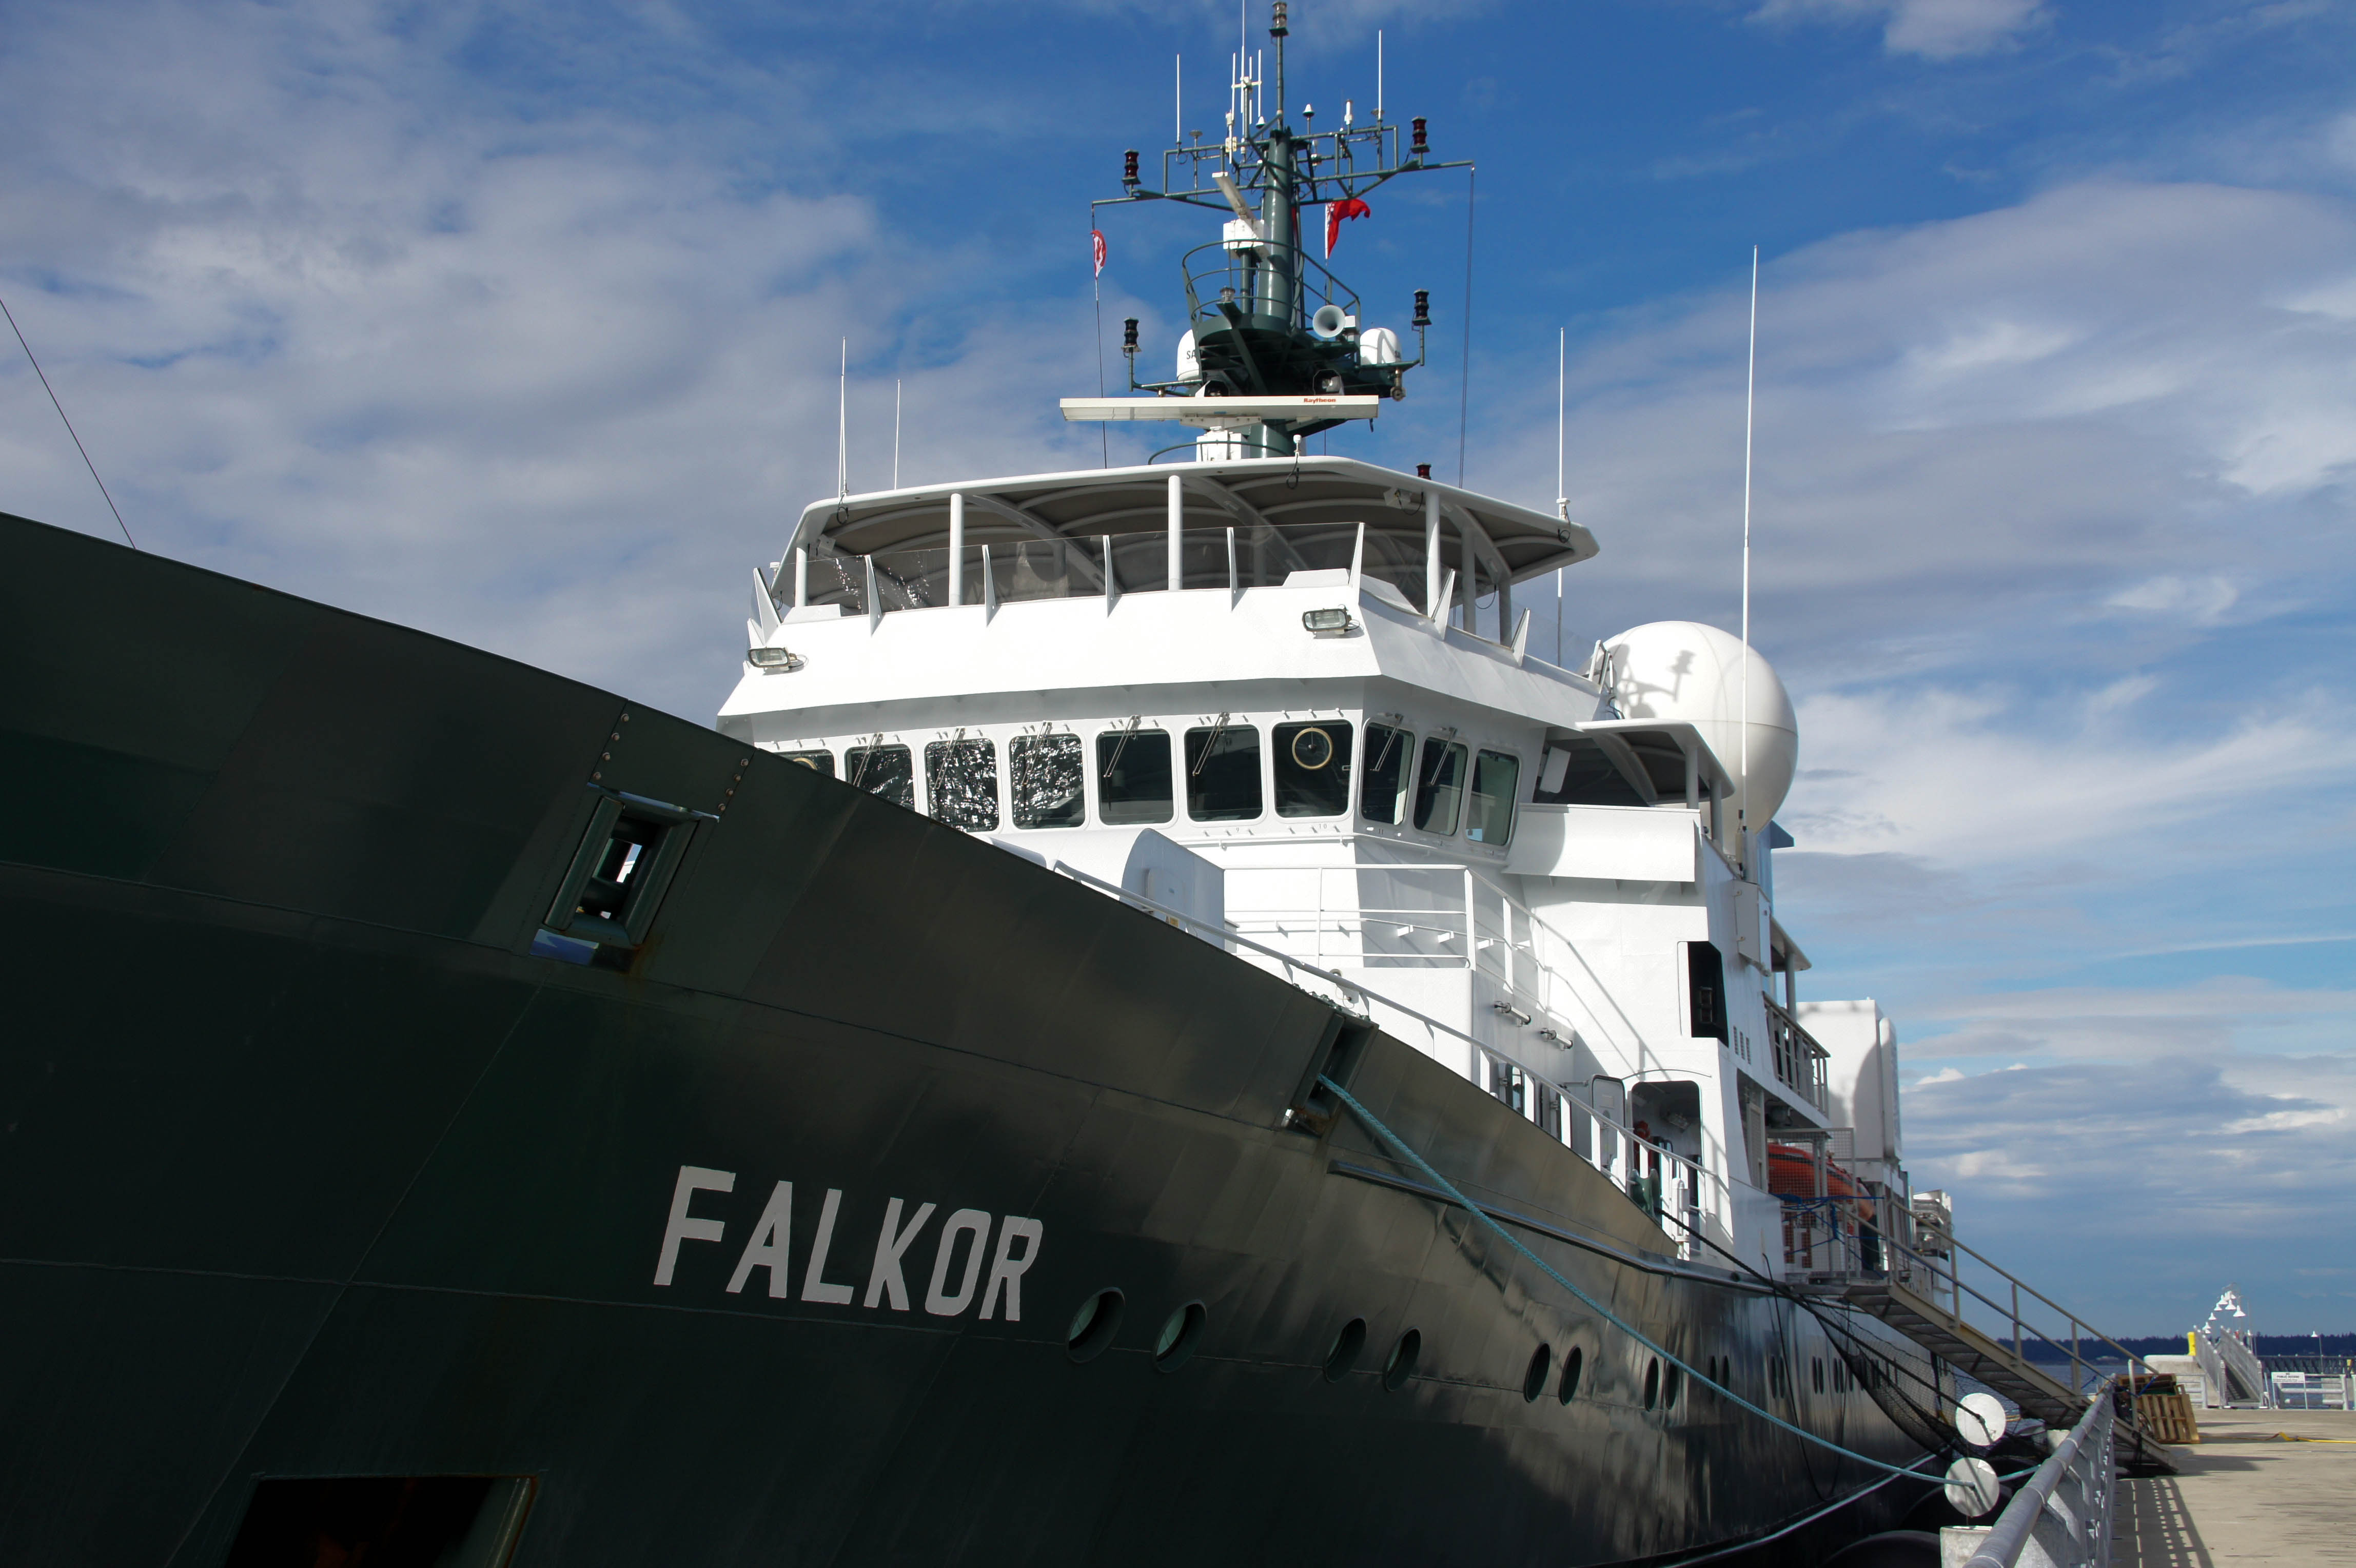 The Falkor at the dock in Nanaimo British Columbia. Photo by Andy Robertson